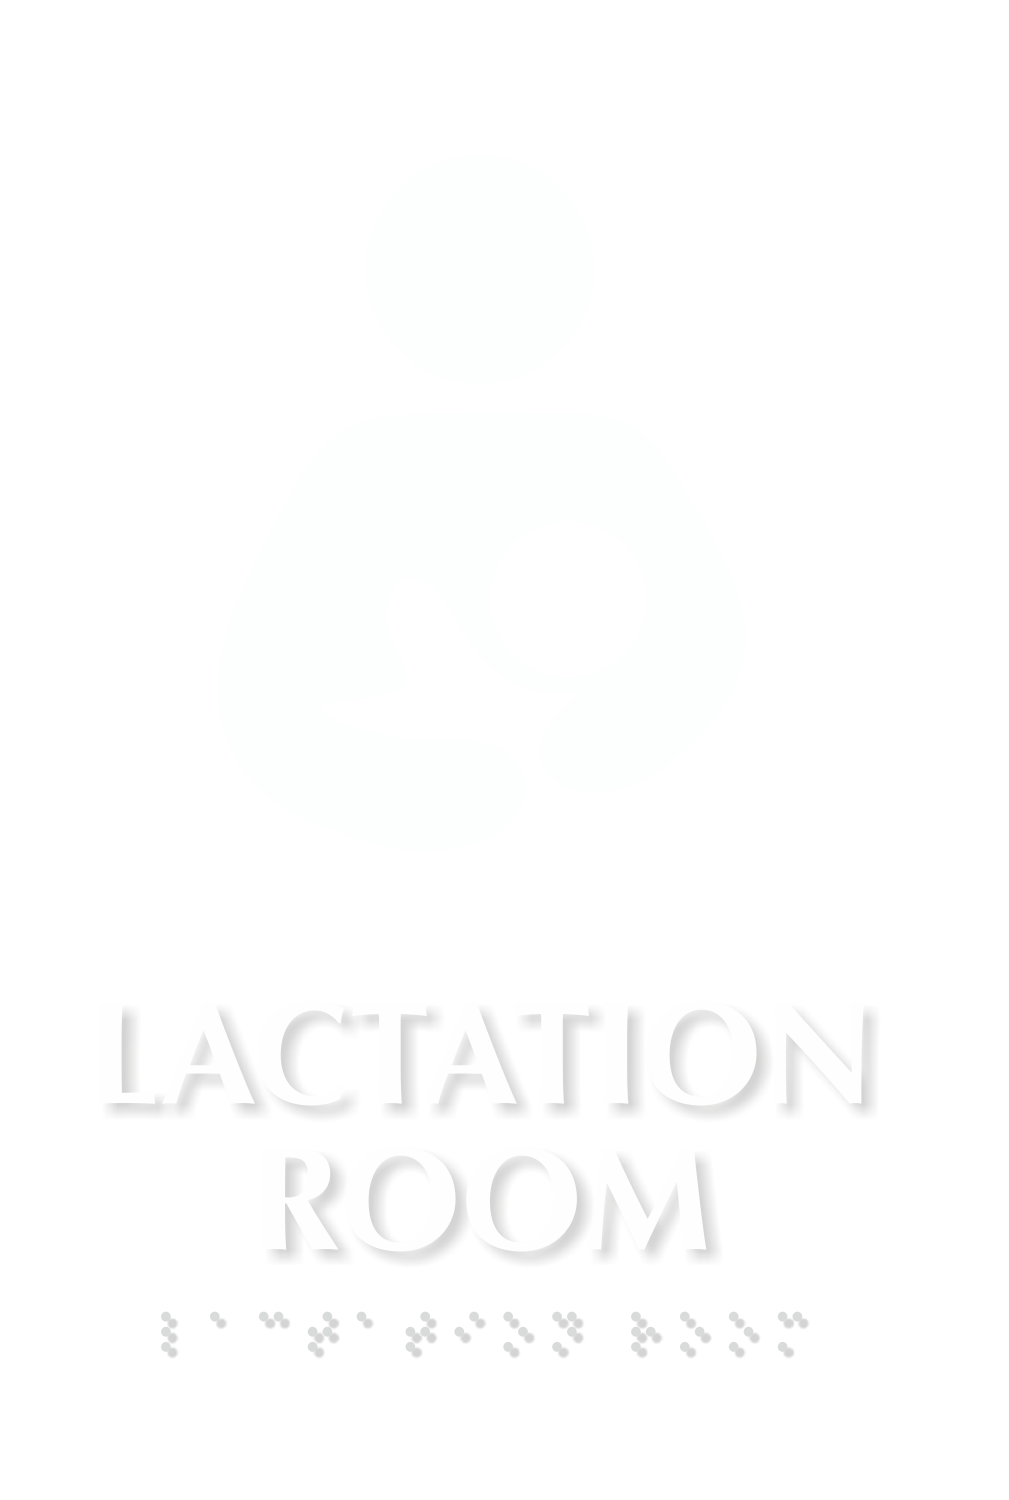 Lactation Room TactileTouch Braille Sign